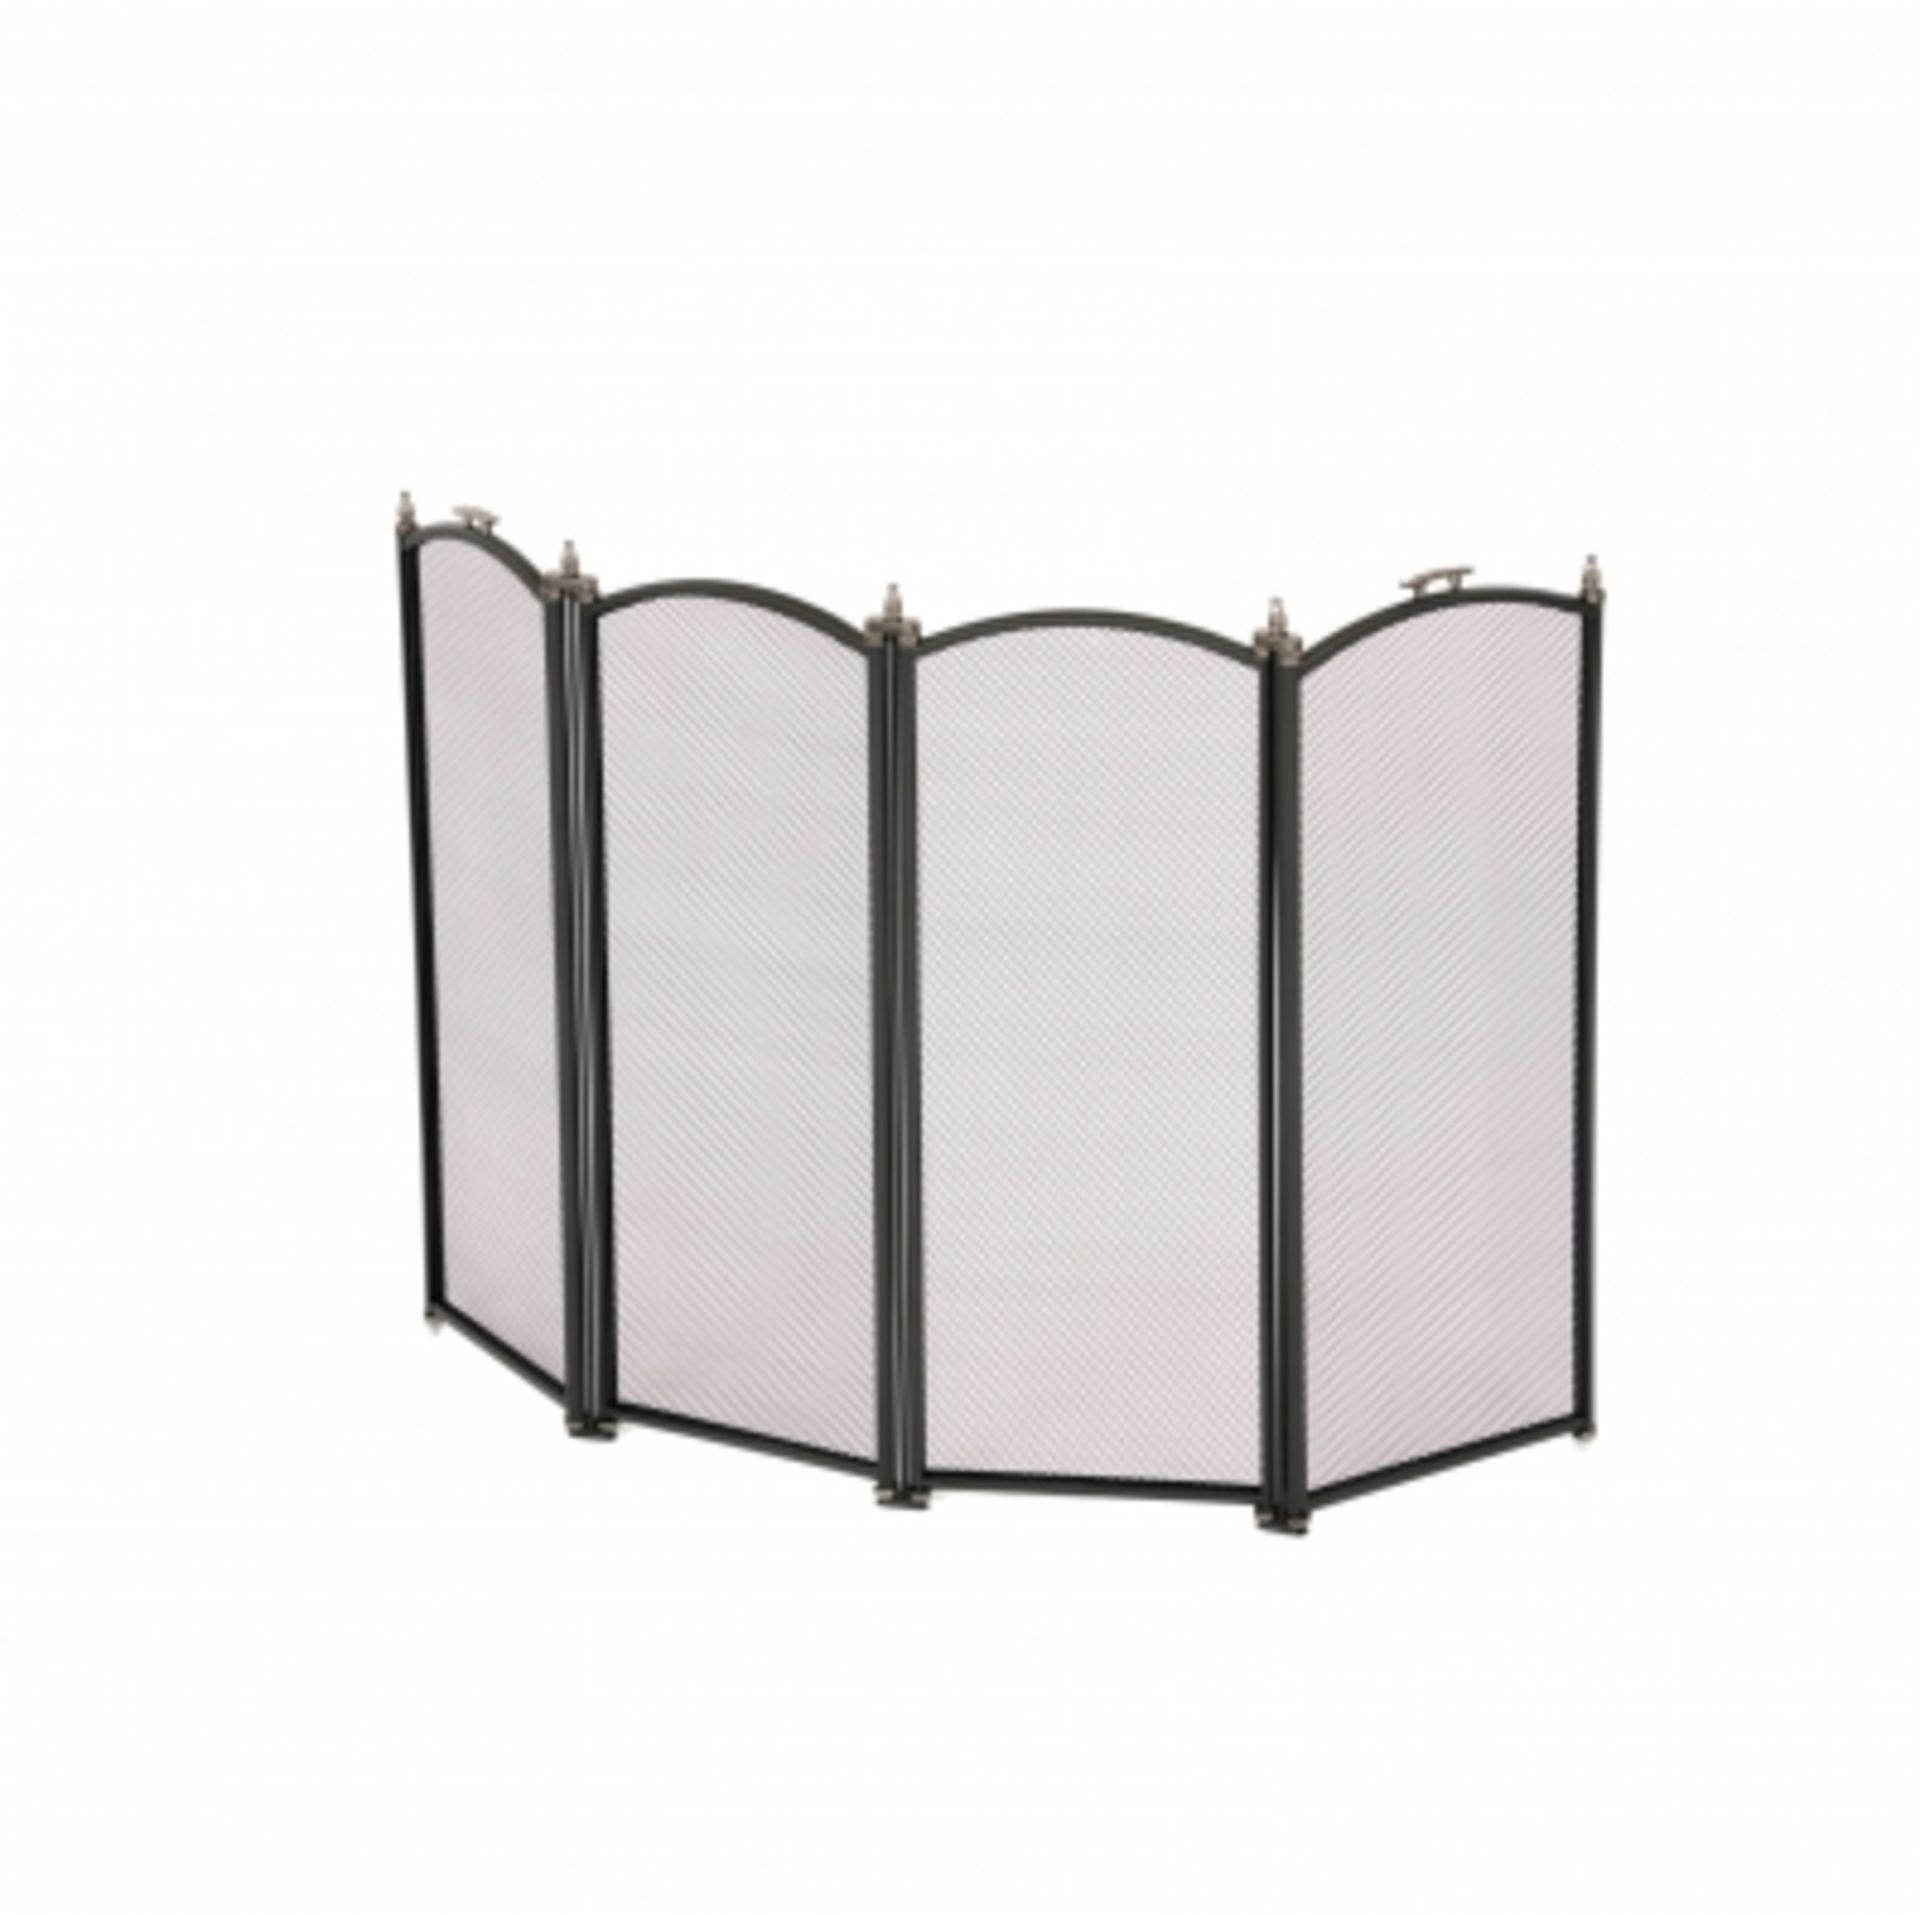 (LF43) Heavy Duty Steel 4 Panel Fire Screen Spark Guard The fire screen provides both a st...